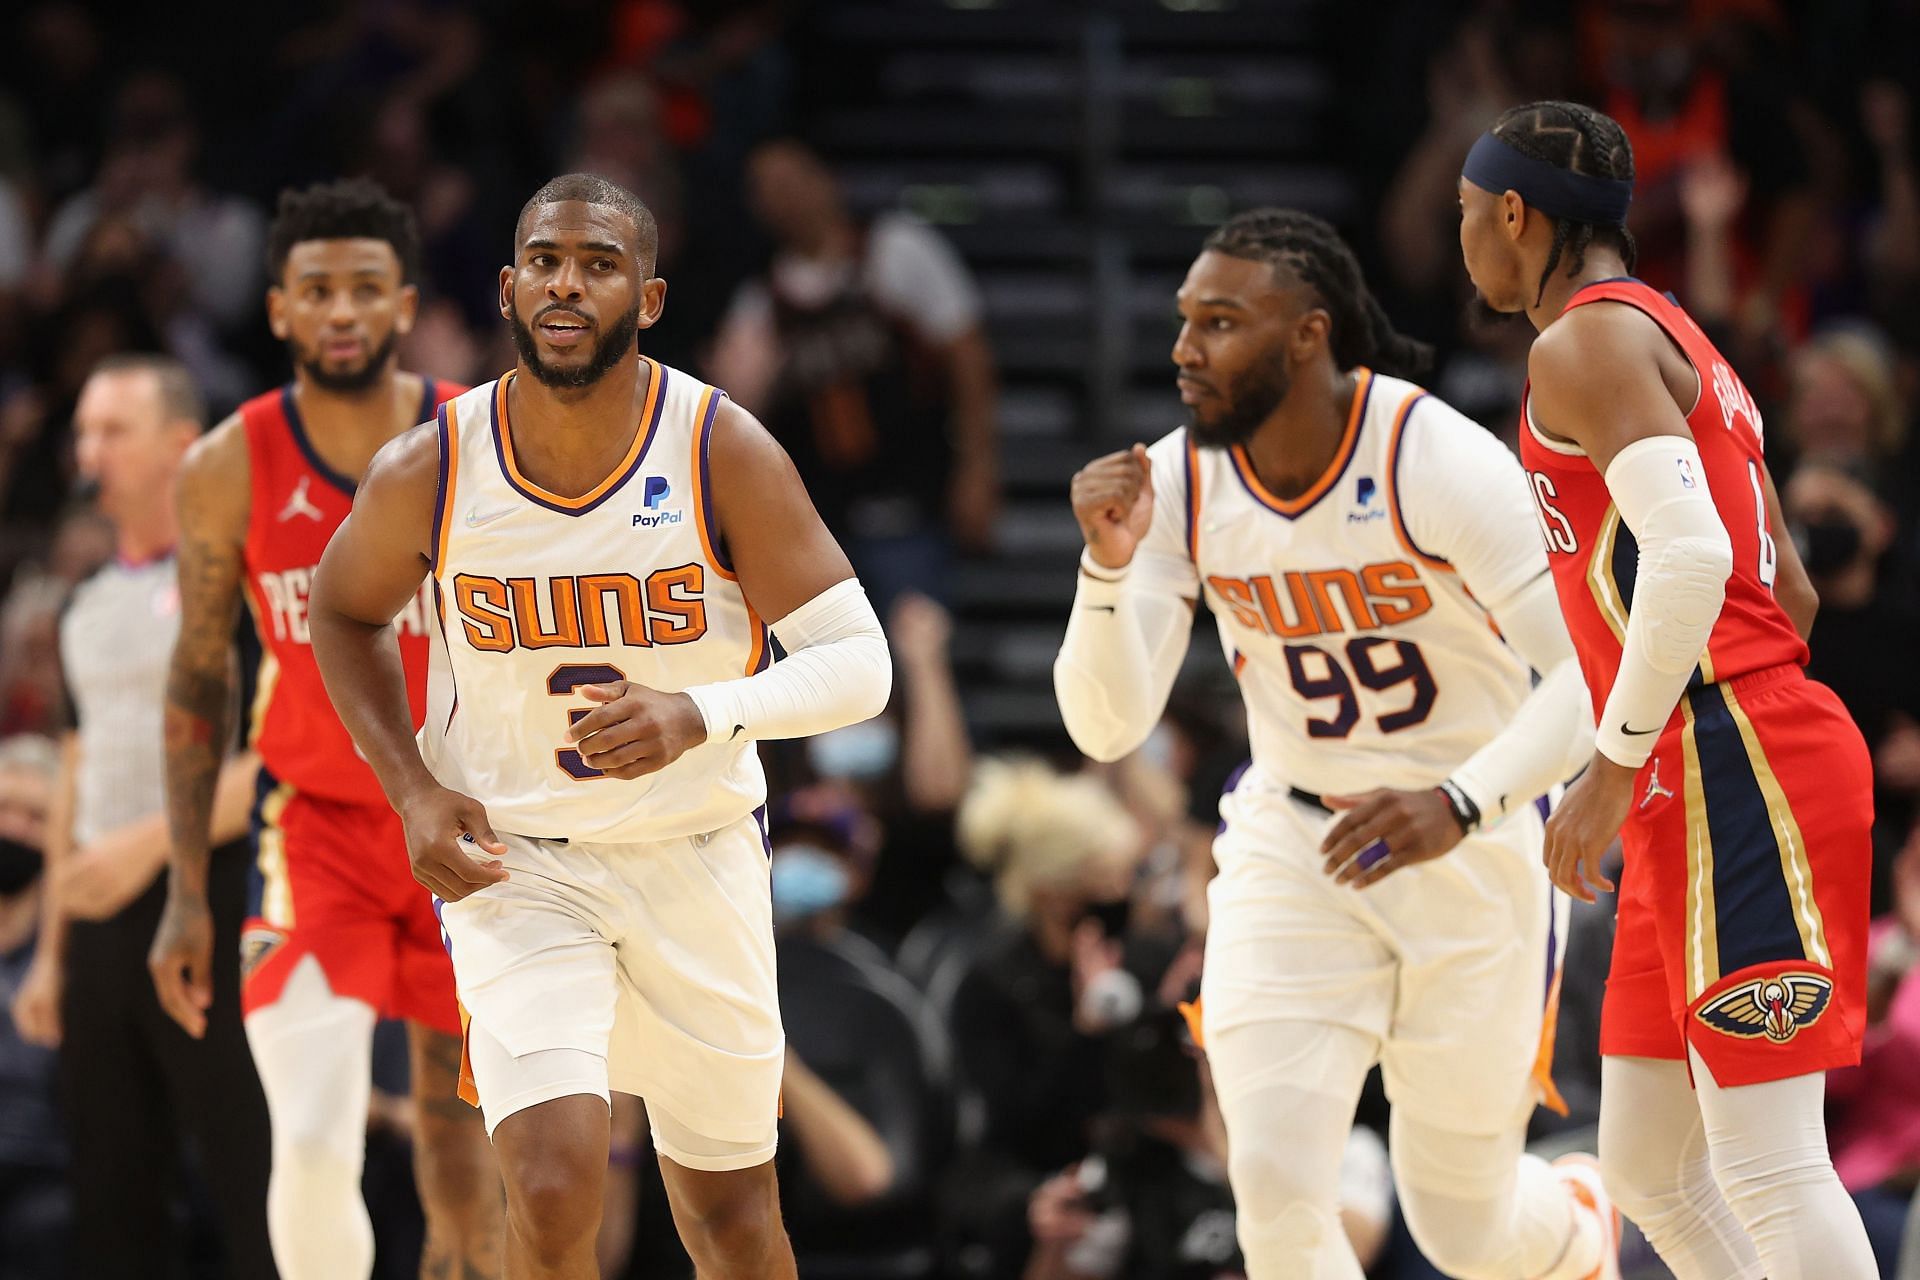 The Phoenix Suns will host the New Orleans Pelicans on February 25th